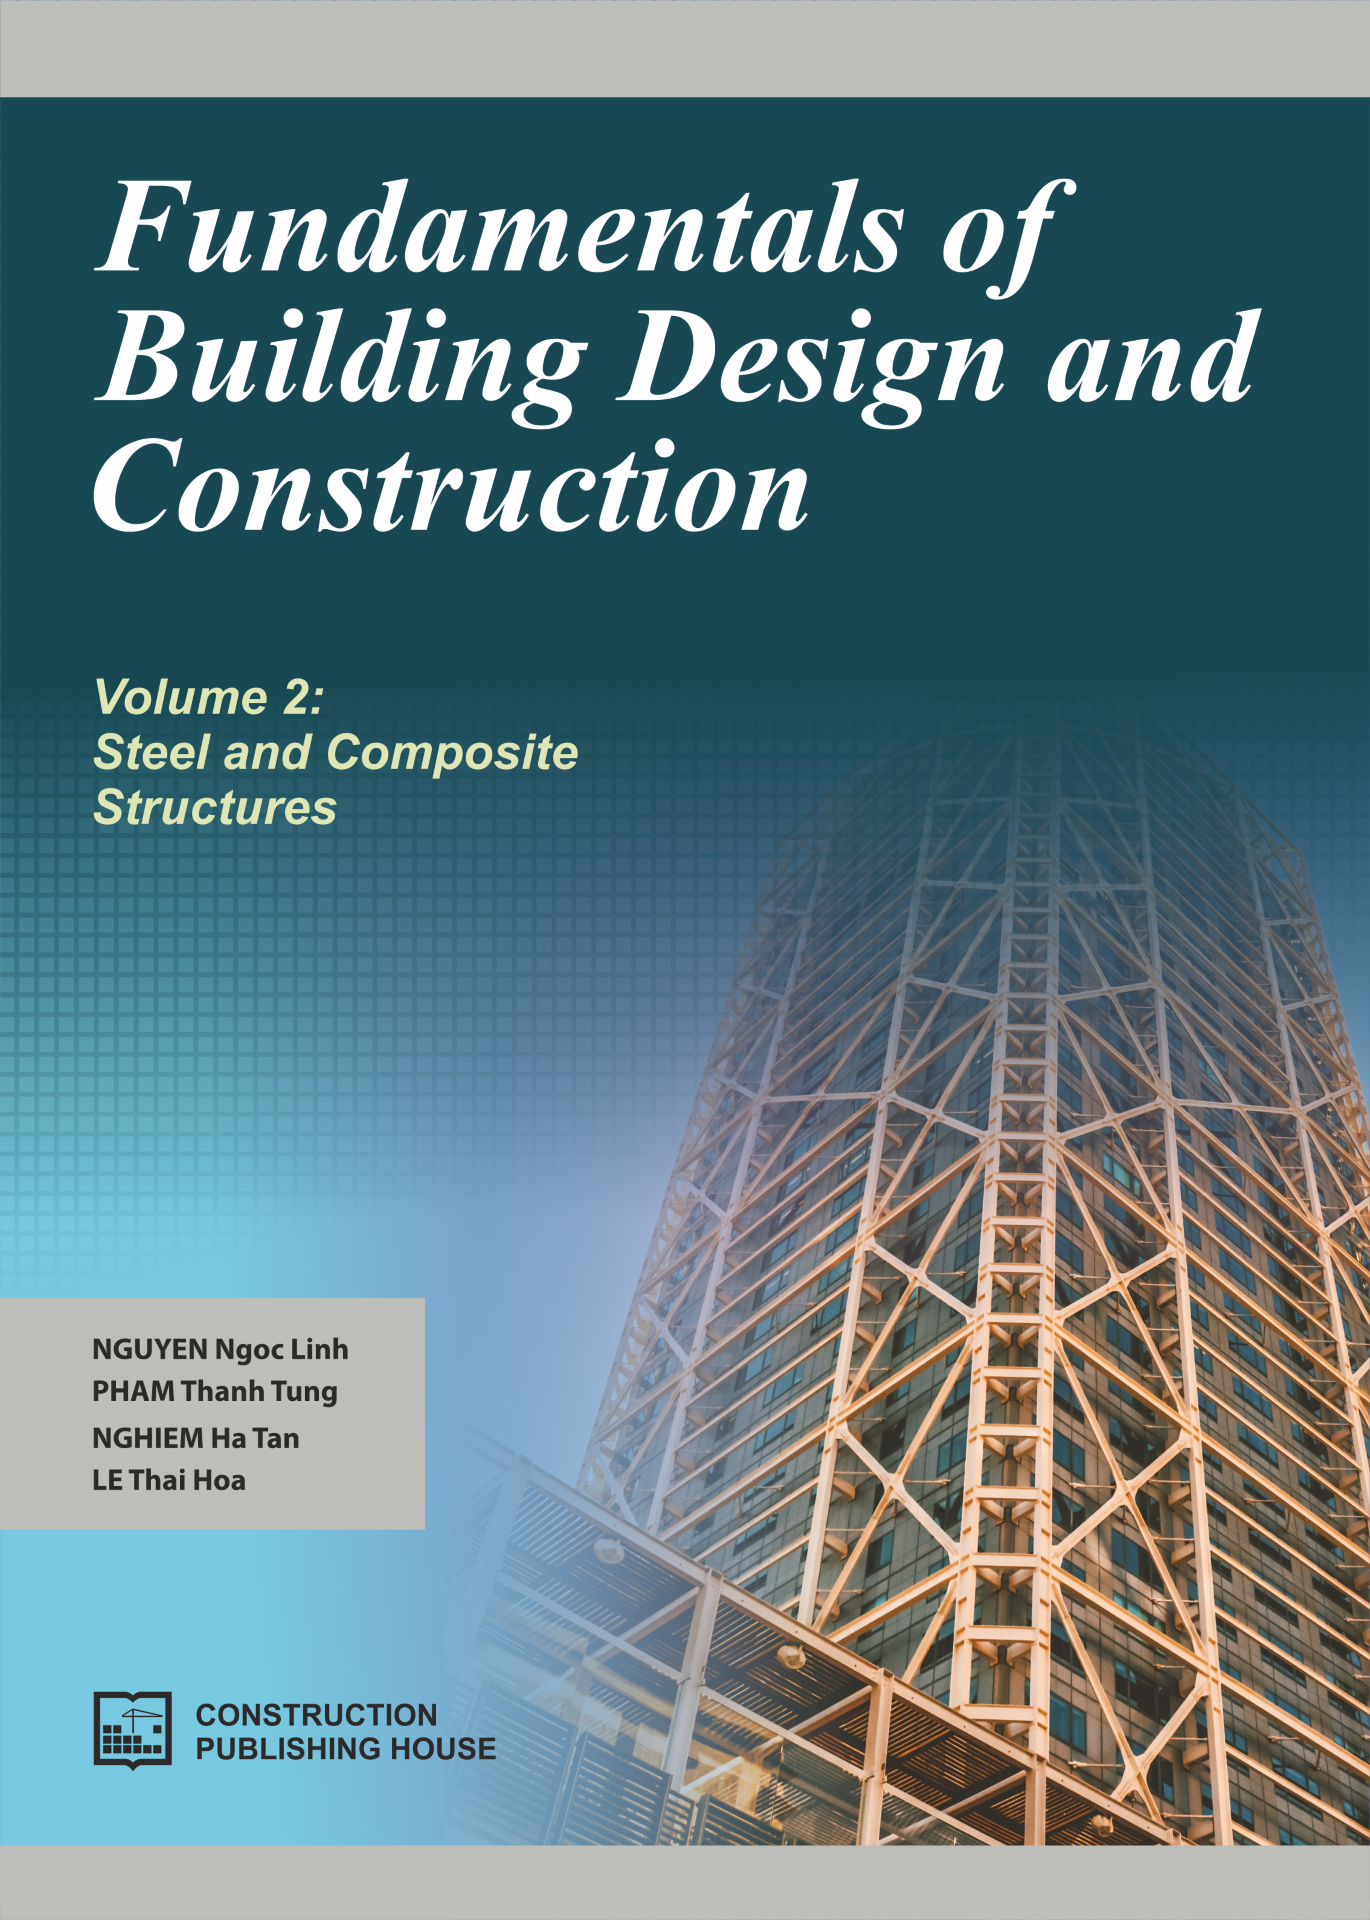 Fundamentals of building design and construction - Volume 2